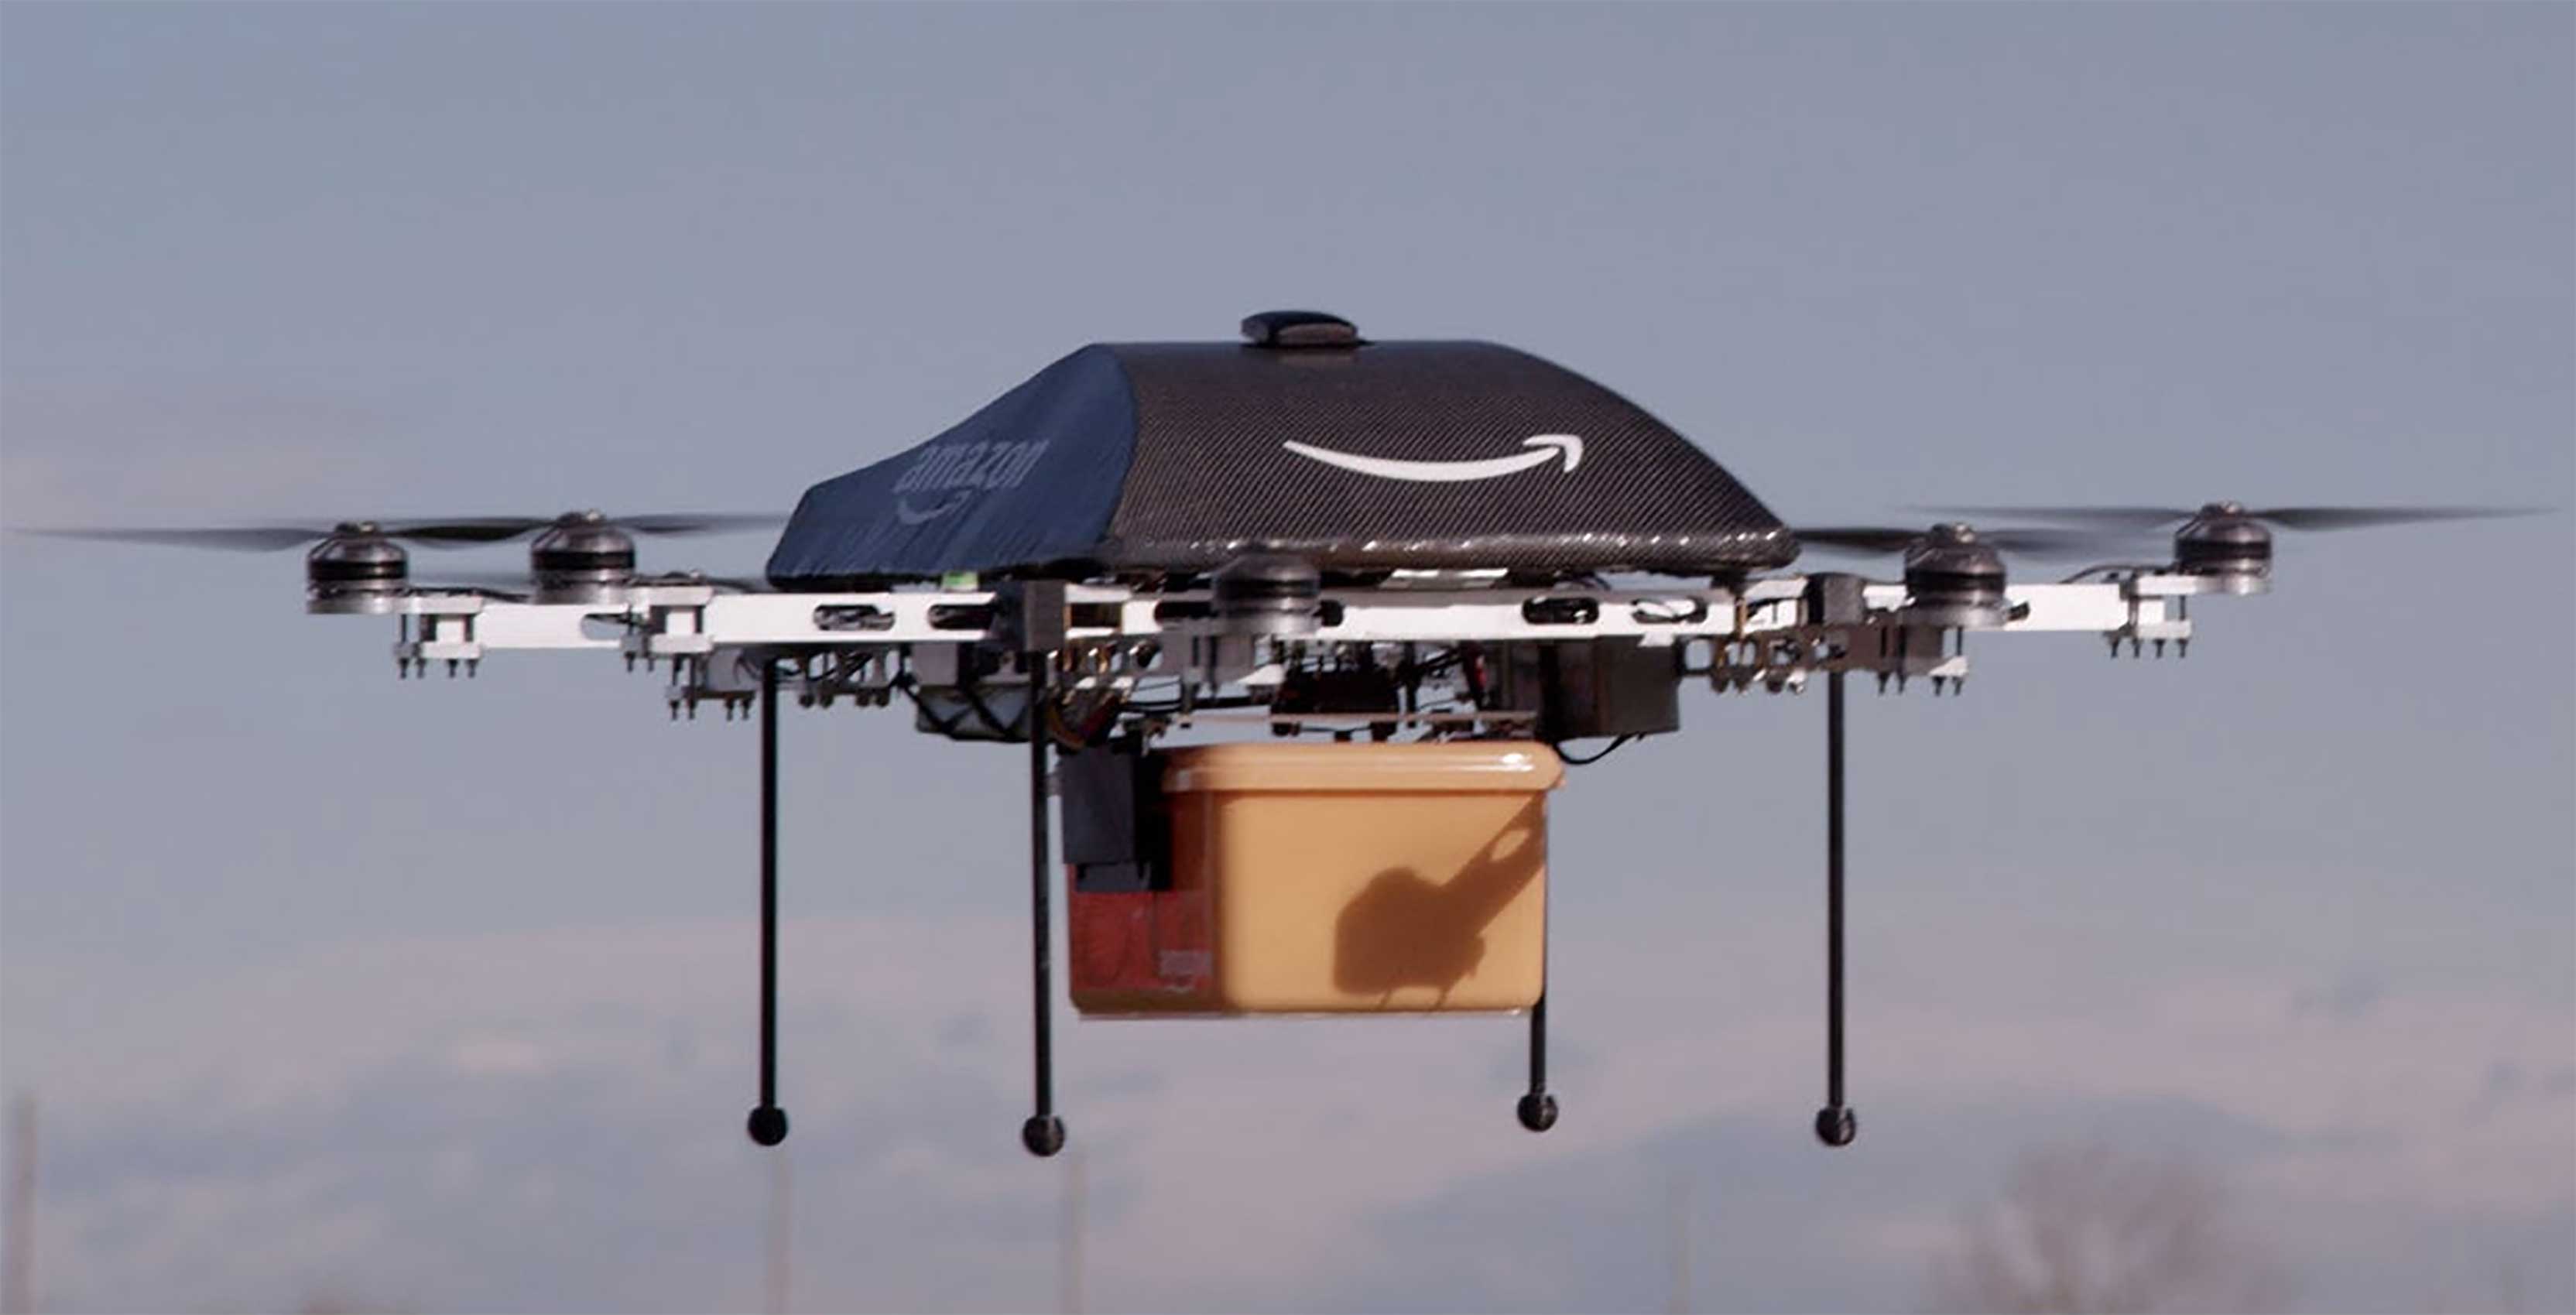 Amazon Drones deliver package while airborne